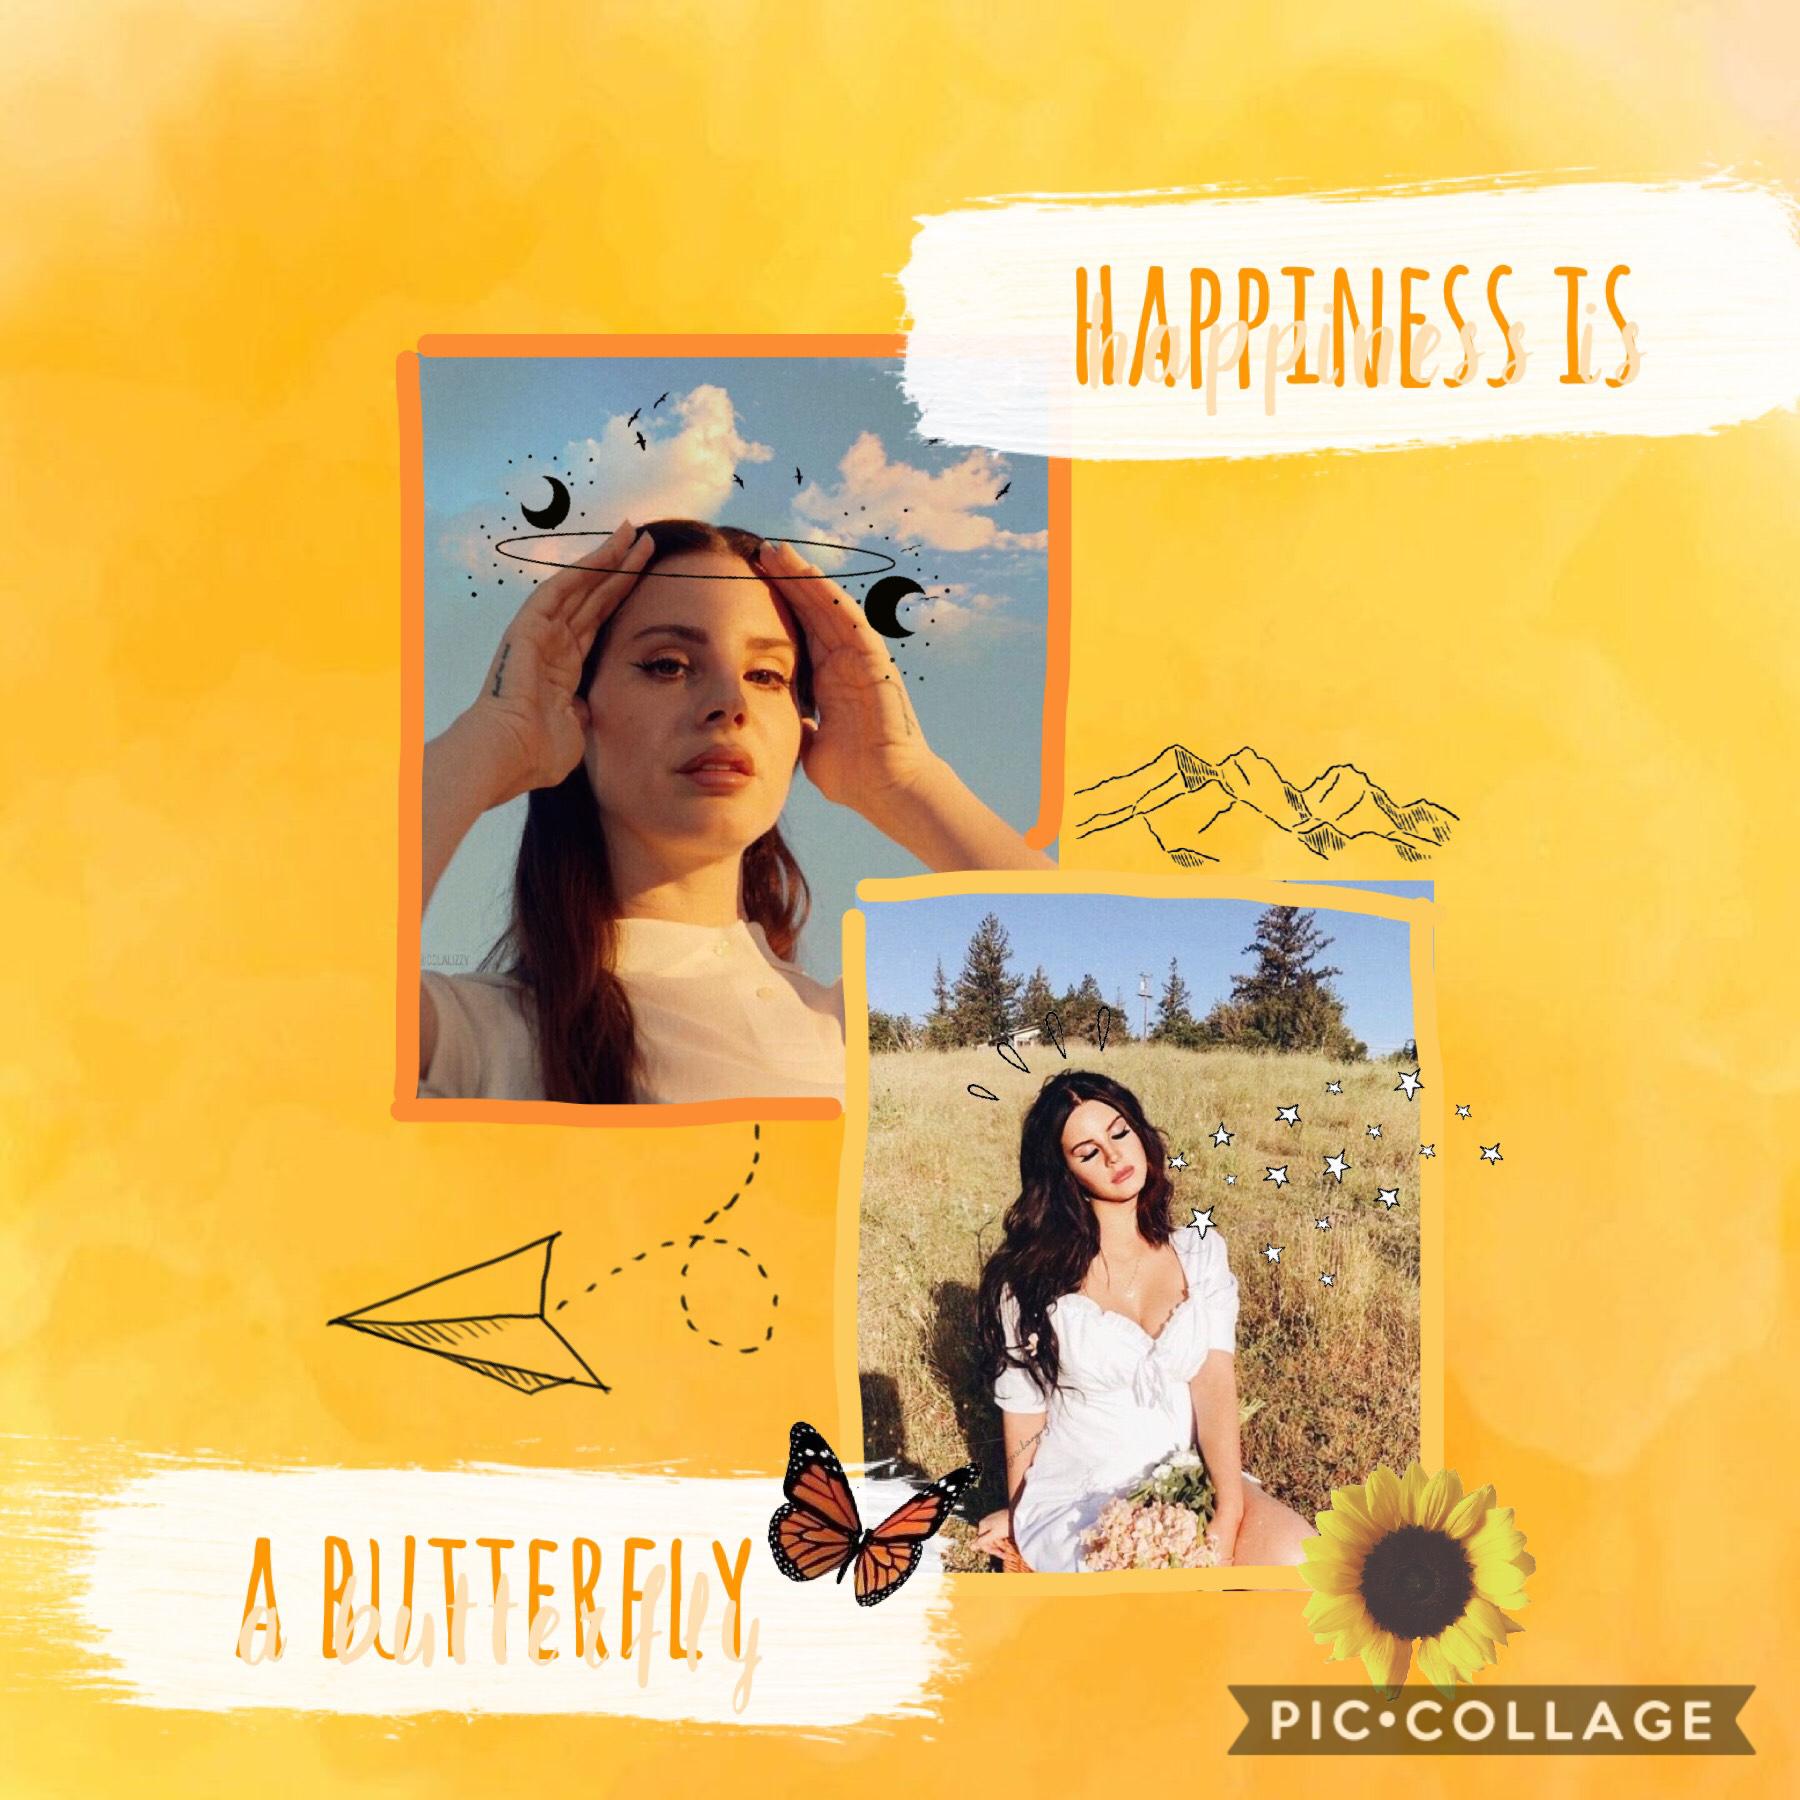 🦋tap here🦋
hey guys, i’m back again. in case you didn’t know, i love lana so much, and her new album nfr just came out, so give it a listen. i love you all my babies xx